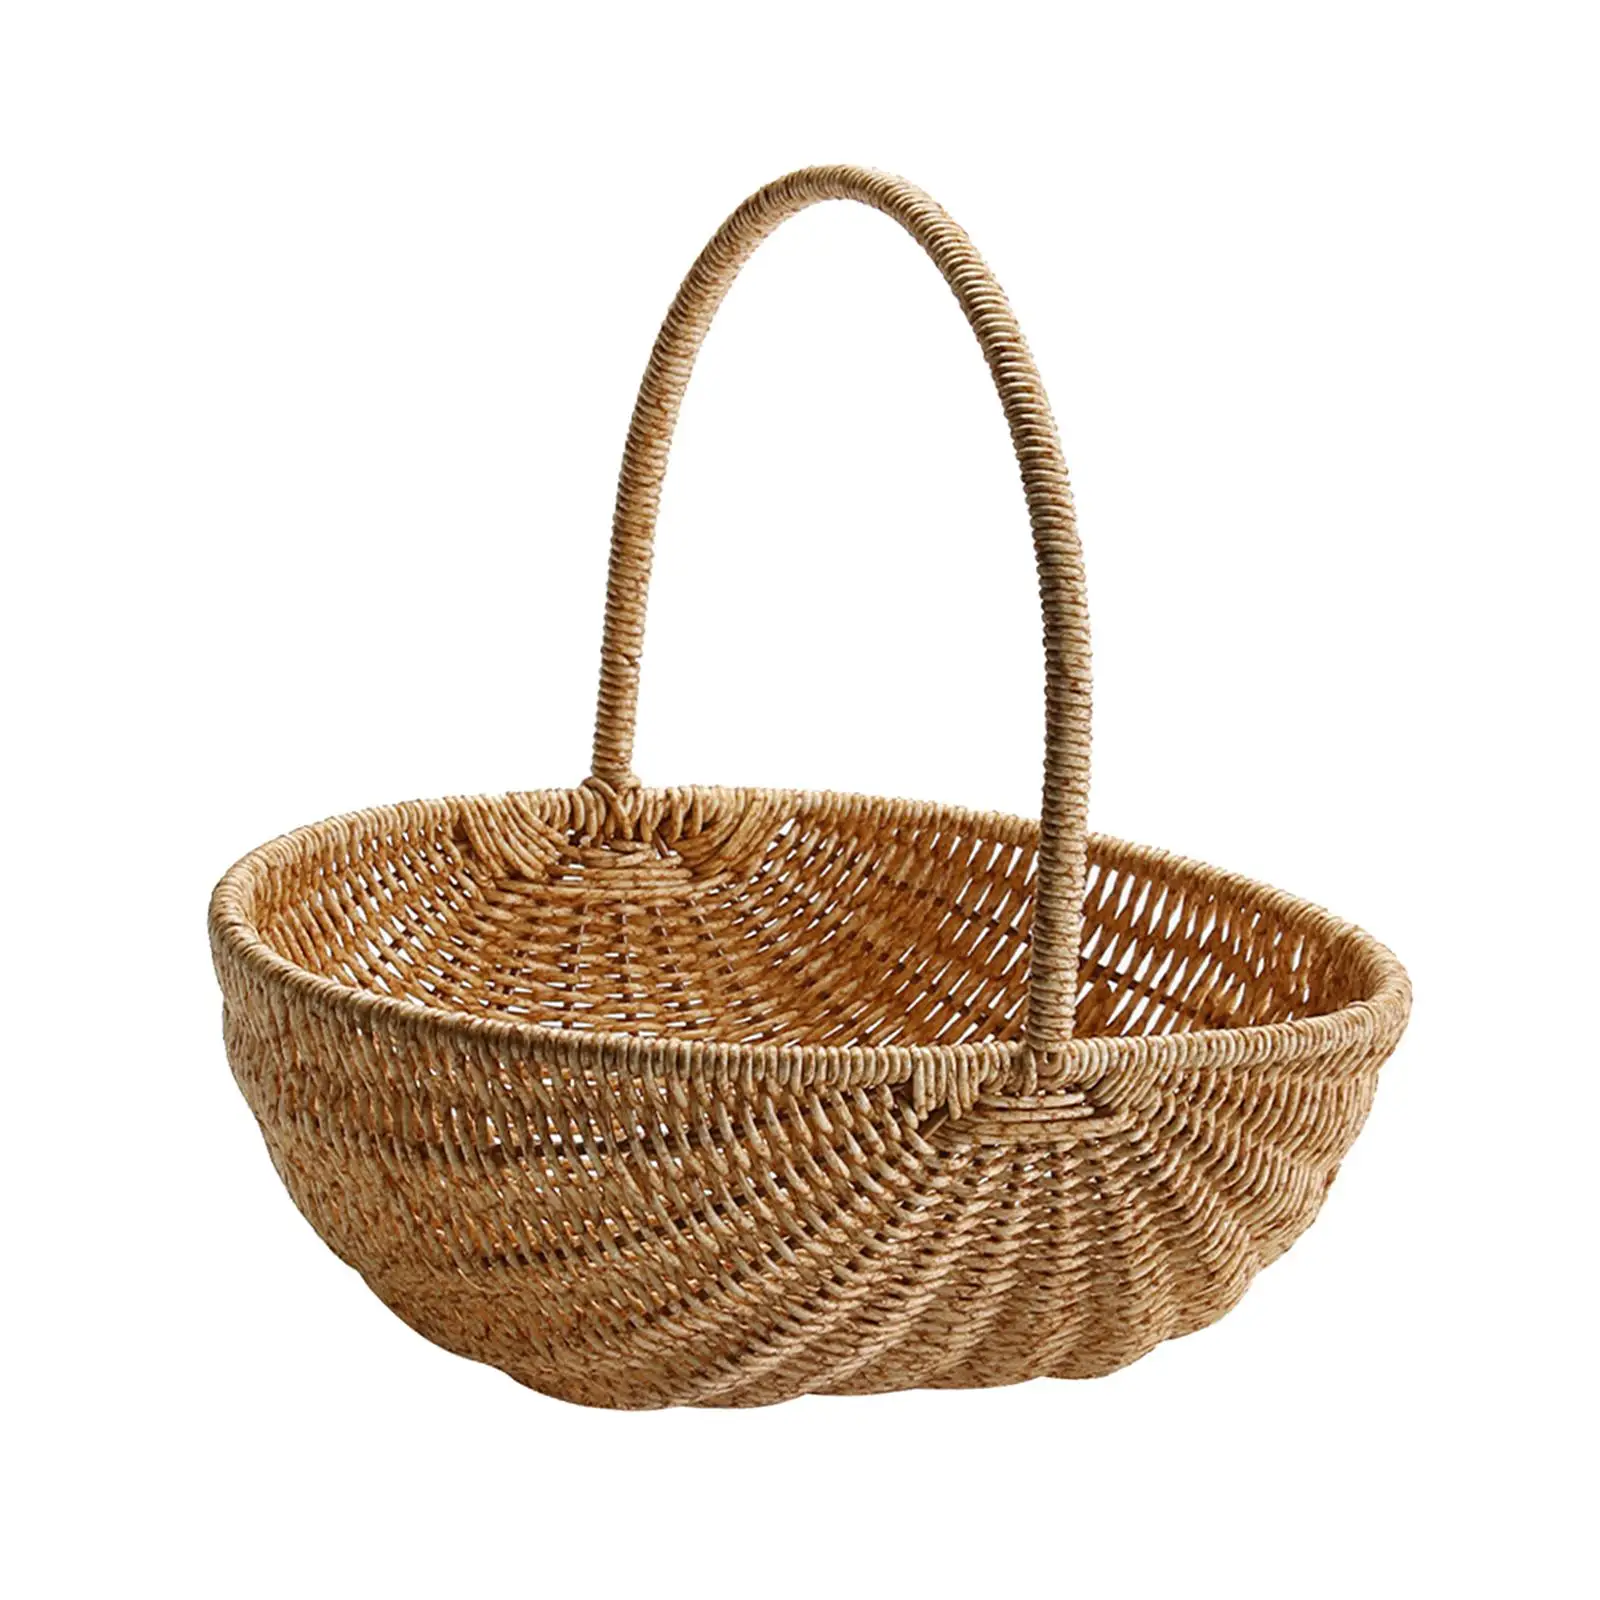 Multifunctional Woven Basket Storage Breathable Decoration with Handle Organizer for Picnic Shopping Cabinet Bathroom Vegetables